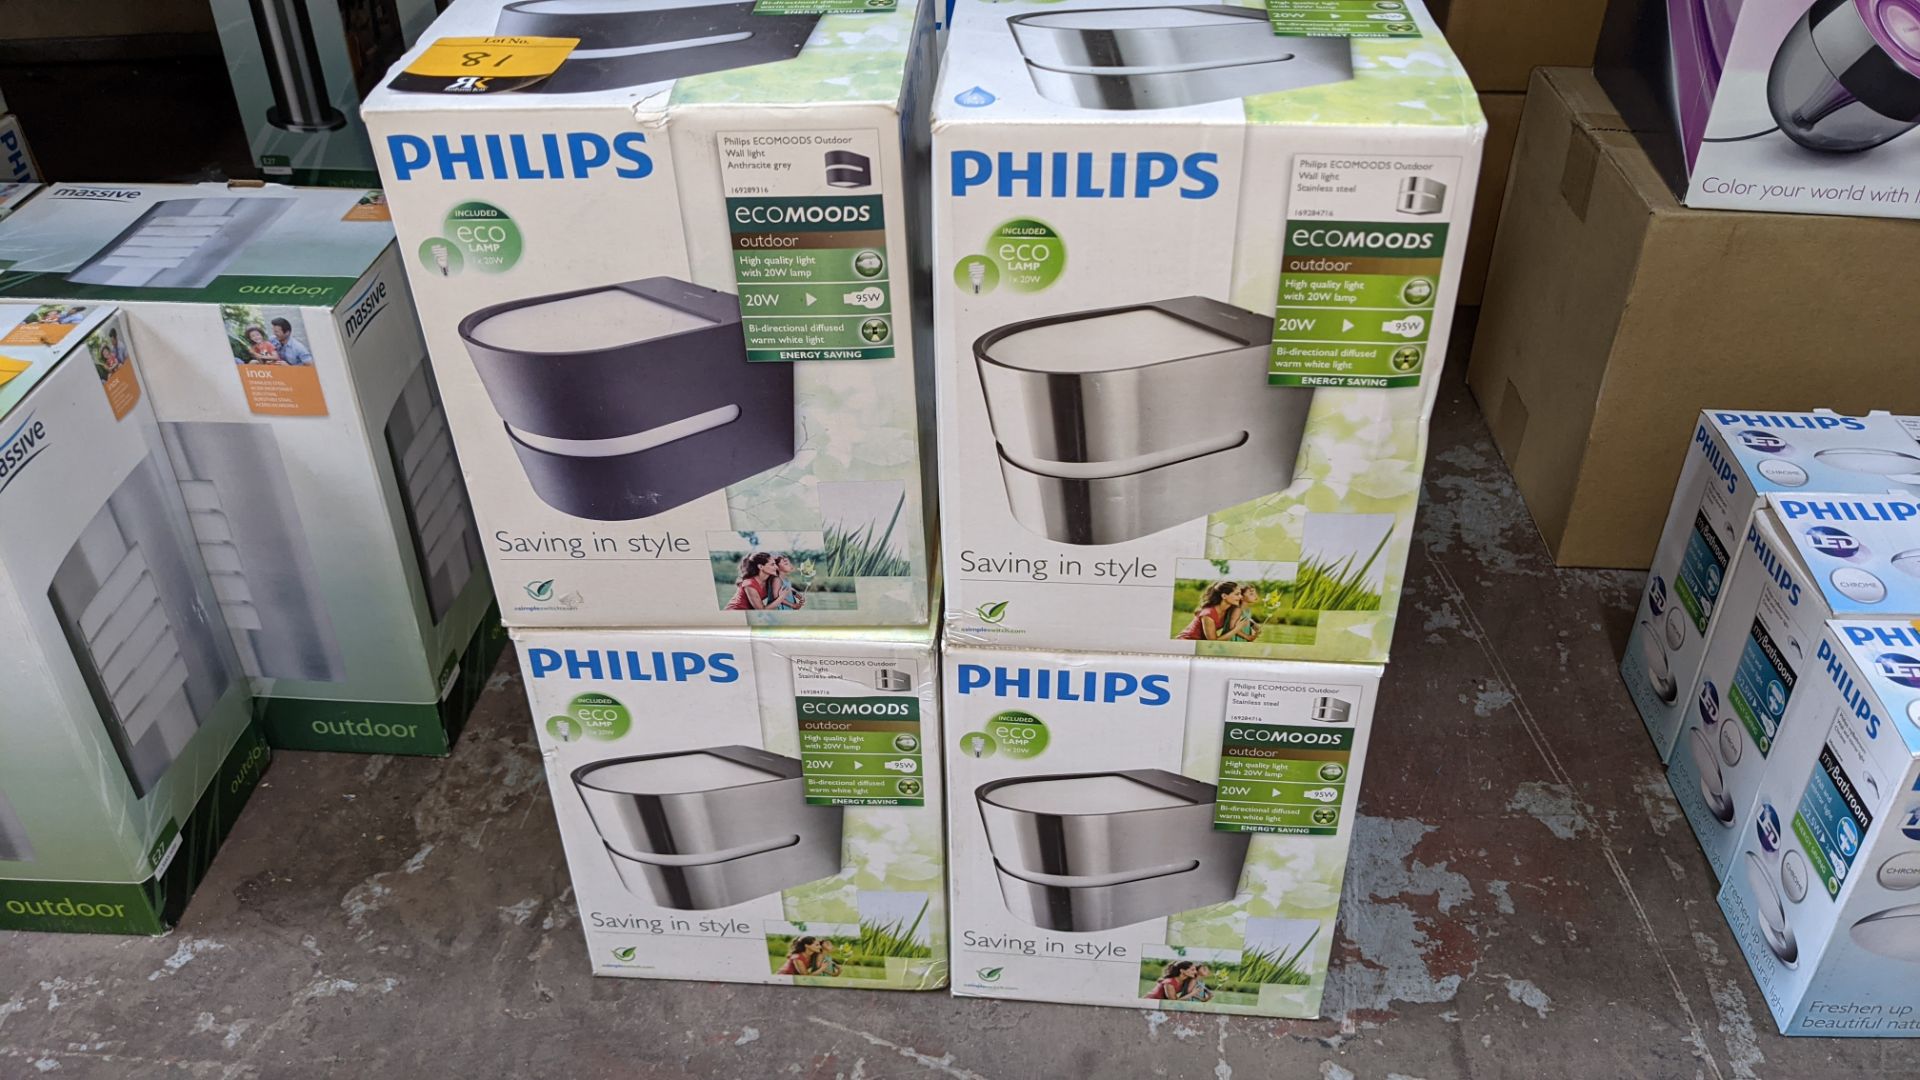 4 off Philips Ecomoods outdoor lamps in stainless steel & anthracite grey finishes - Image 2 of 3